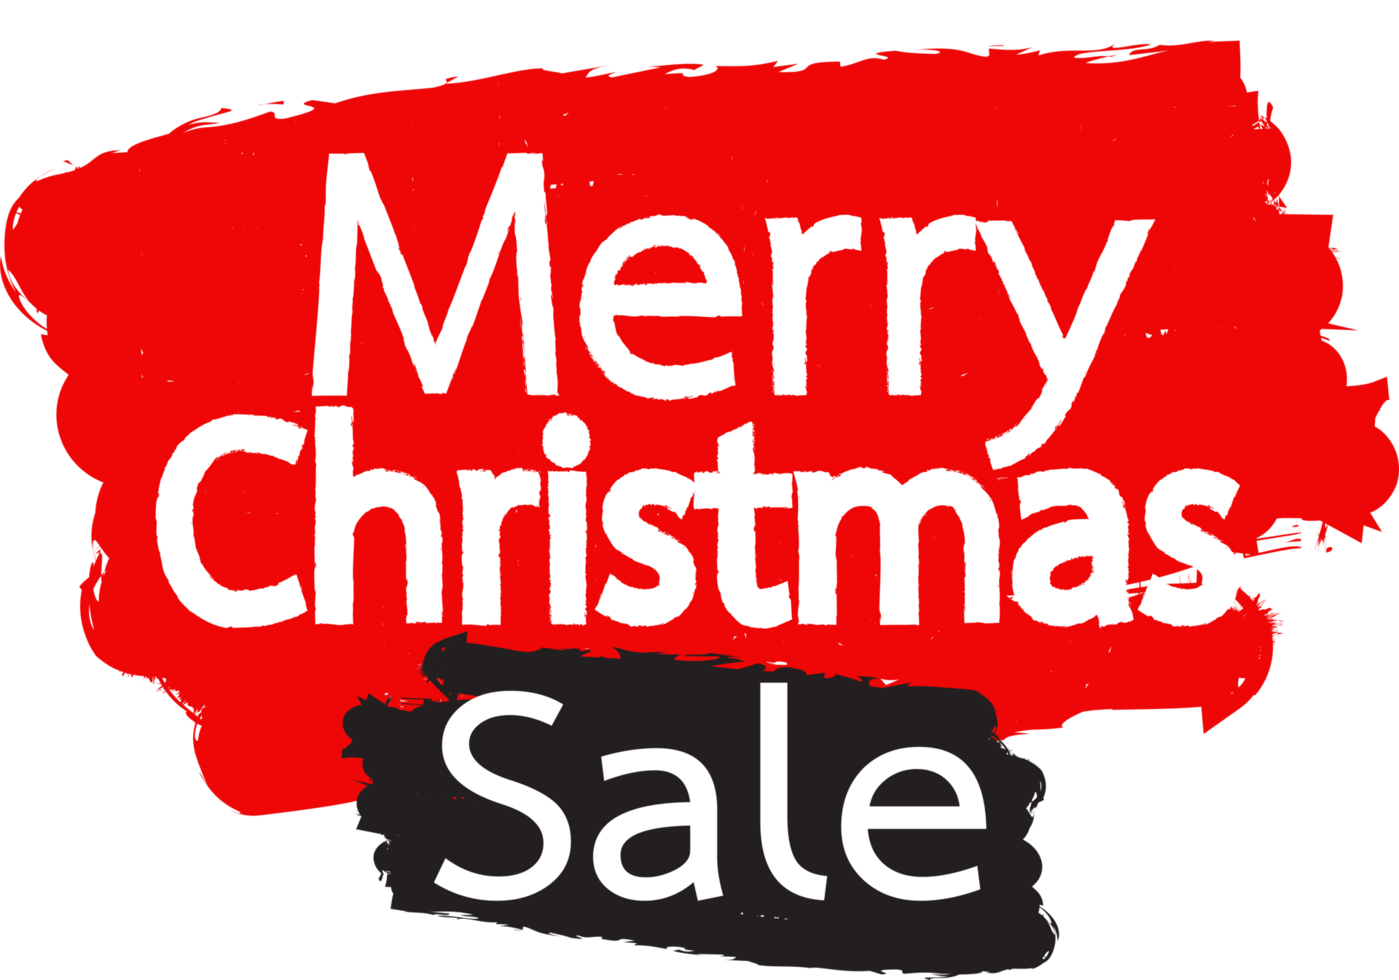 Merry Christmas text Lettering design png